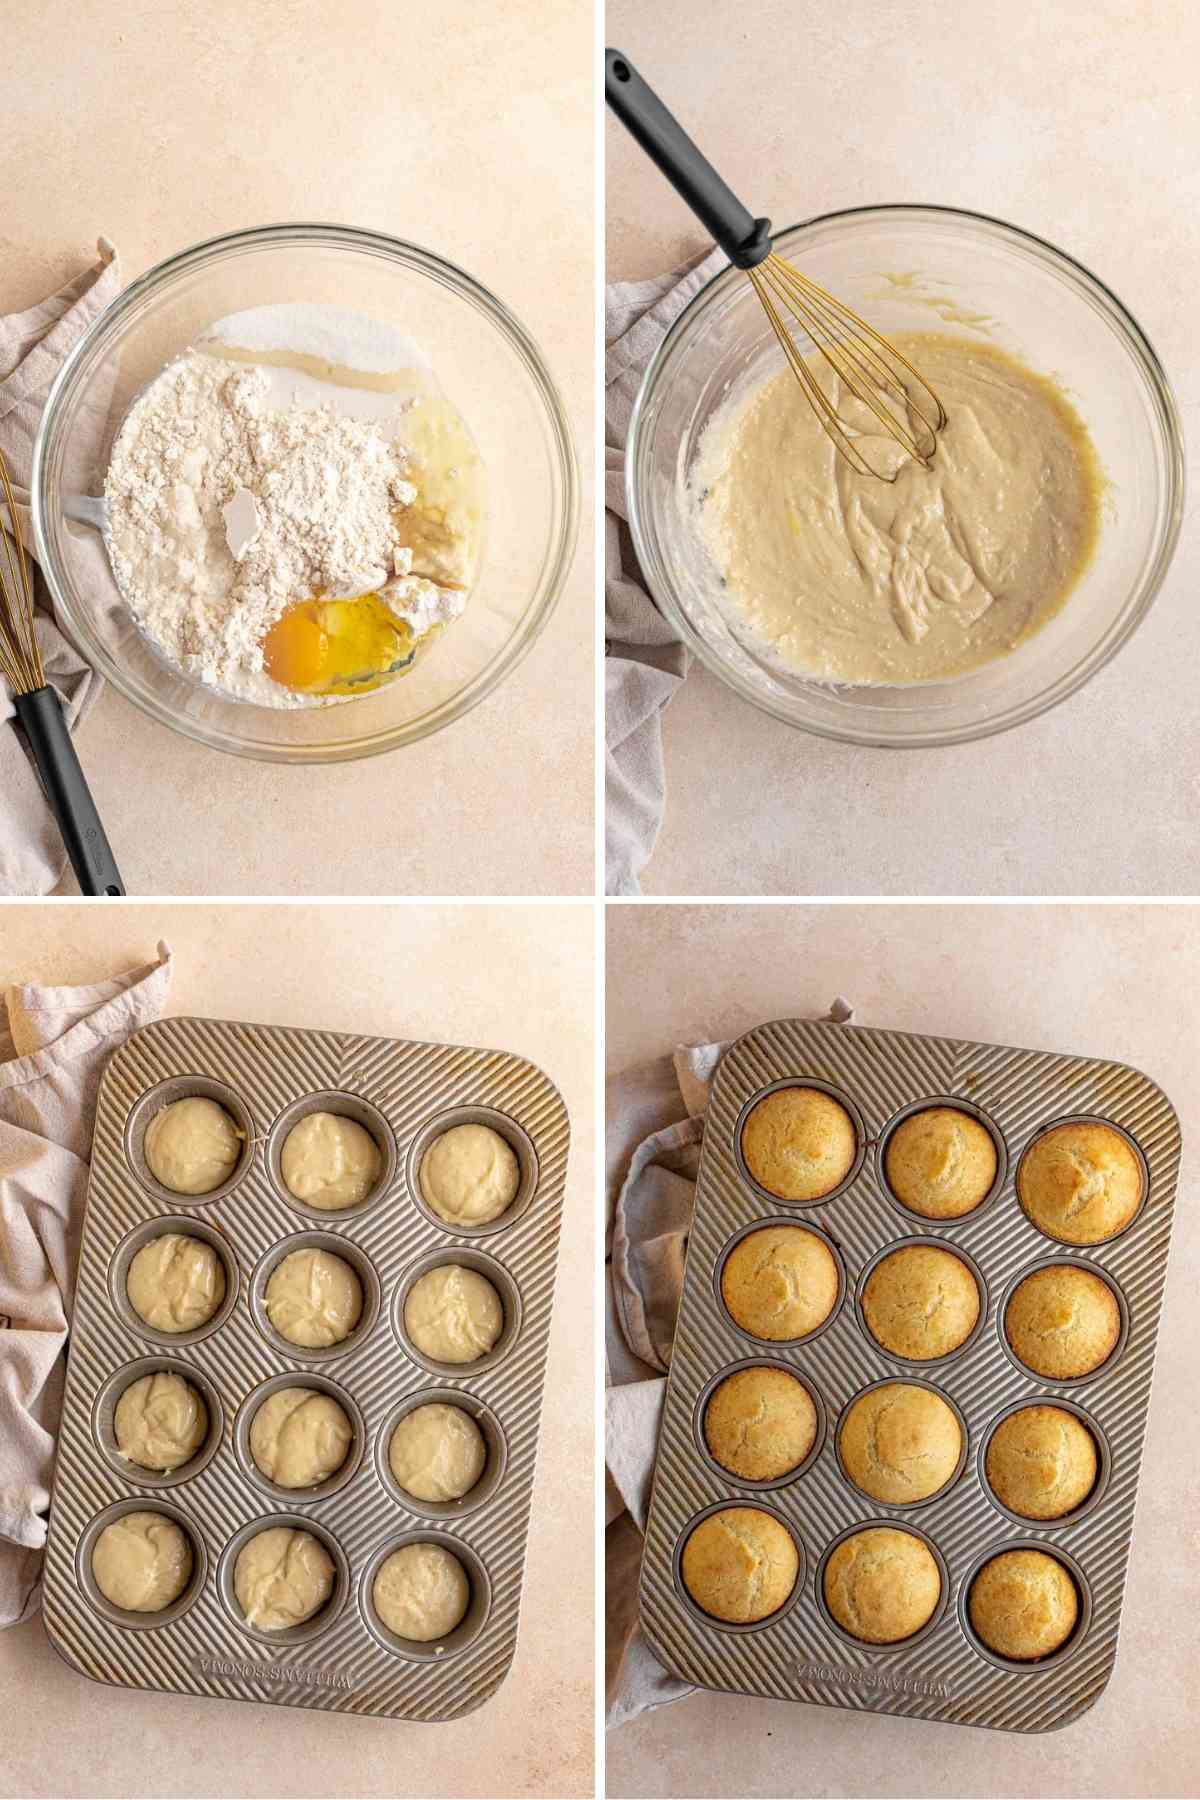 Mini Doughnut Muffins with ingredients, then batter, then scooped into muffin tin and finally baked in a collage form.